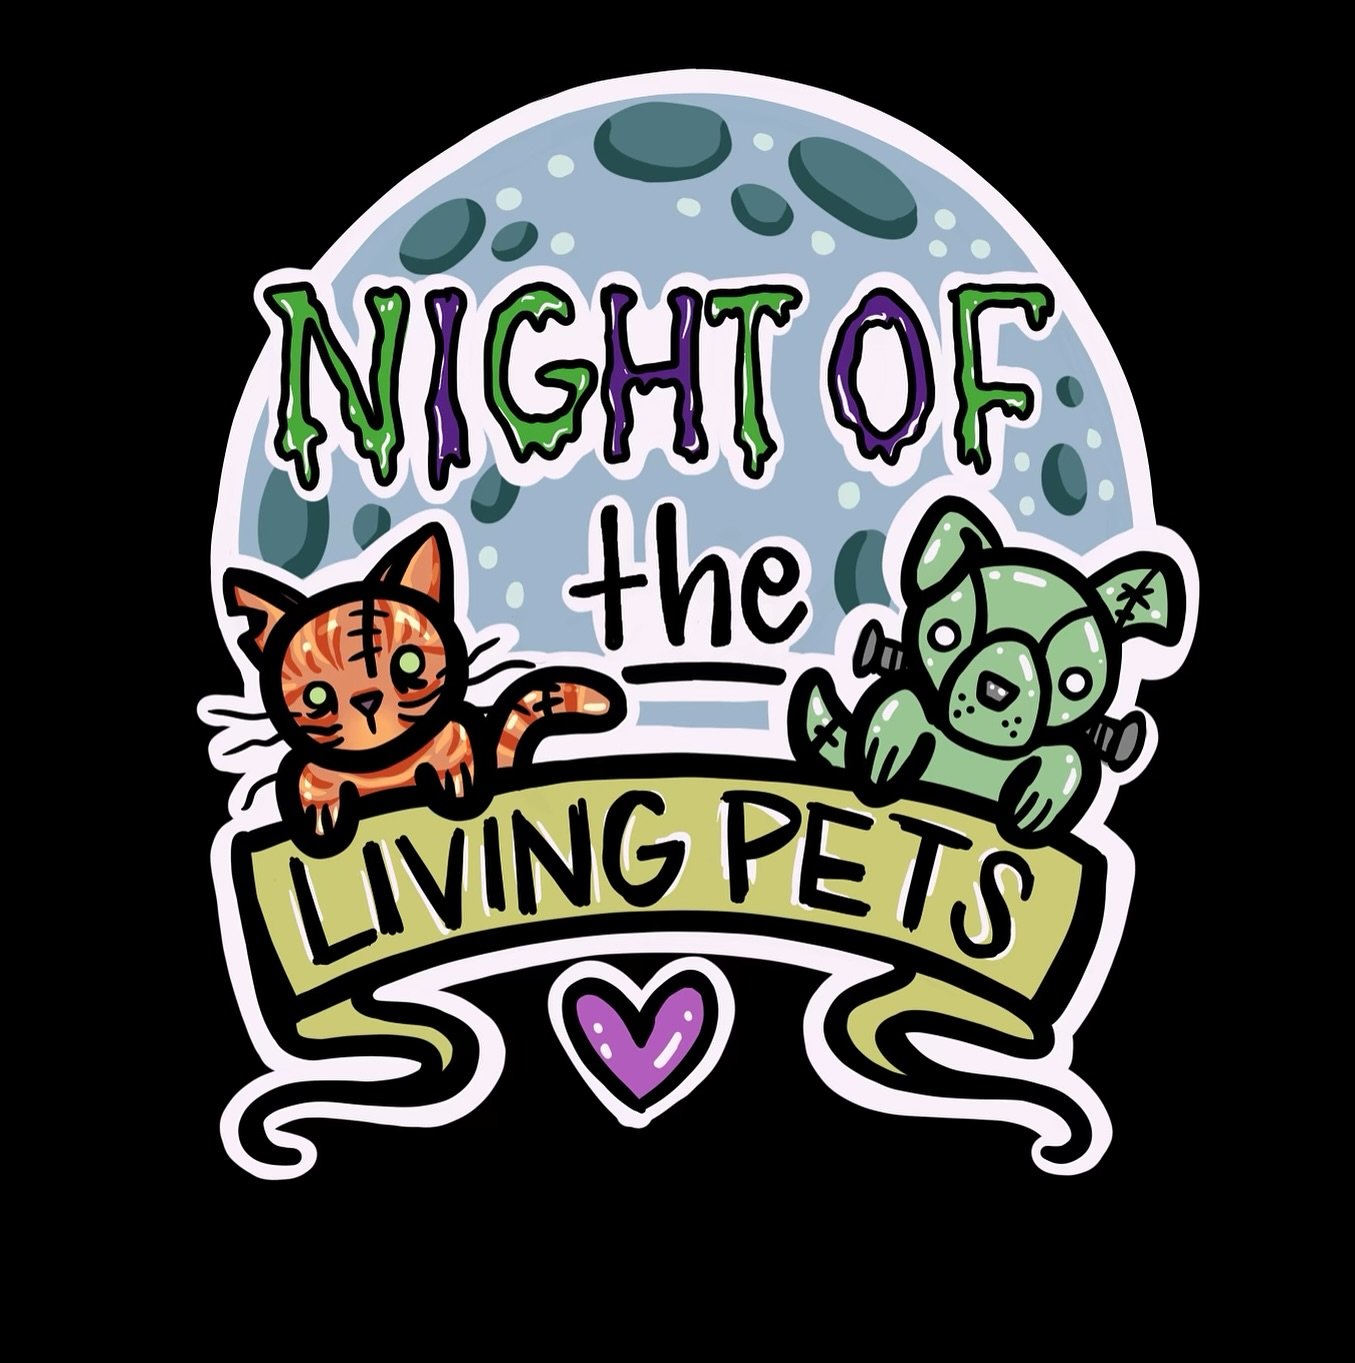 ⚡️ IT&rsquo;S ALIVE ⚡️

www.nightofthelivingpets.com is officially a REALITY and if you take a closer look, you will see our logo got a little upgrade too!

April 24th would have been Bonez&rsquo;s birthday and it also marks 3 months since he crossed